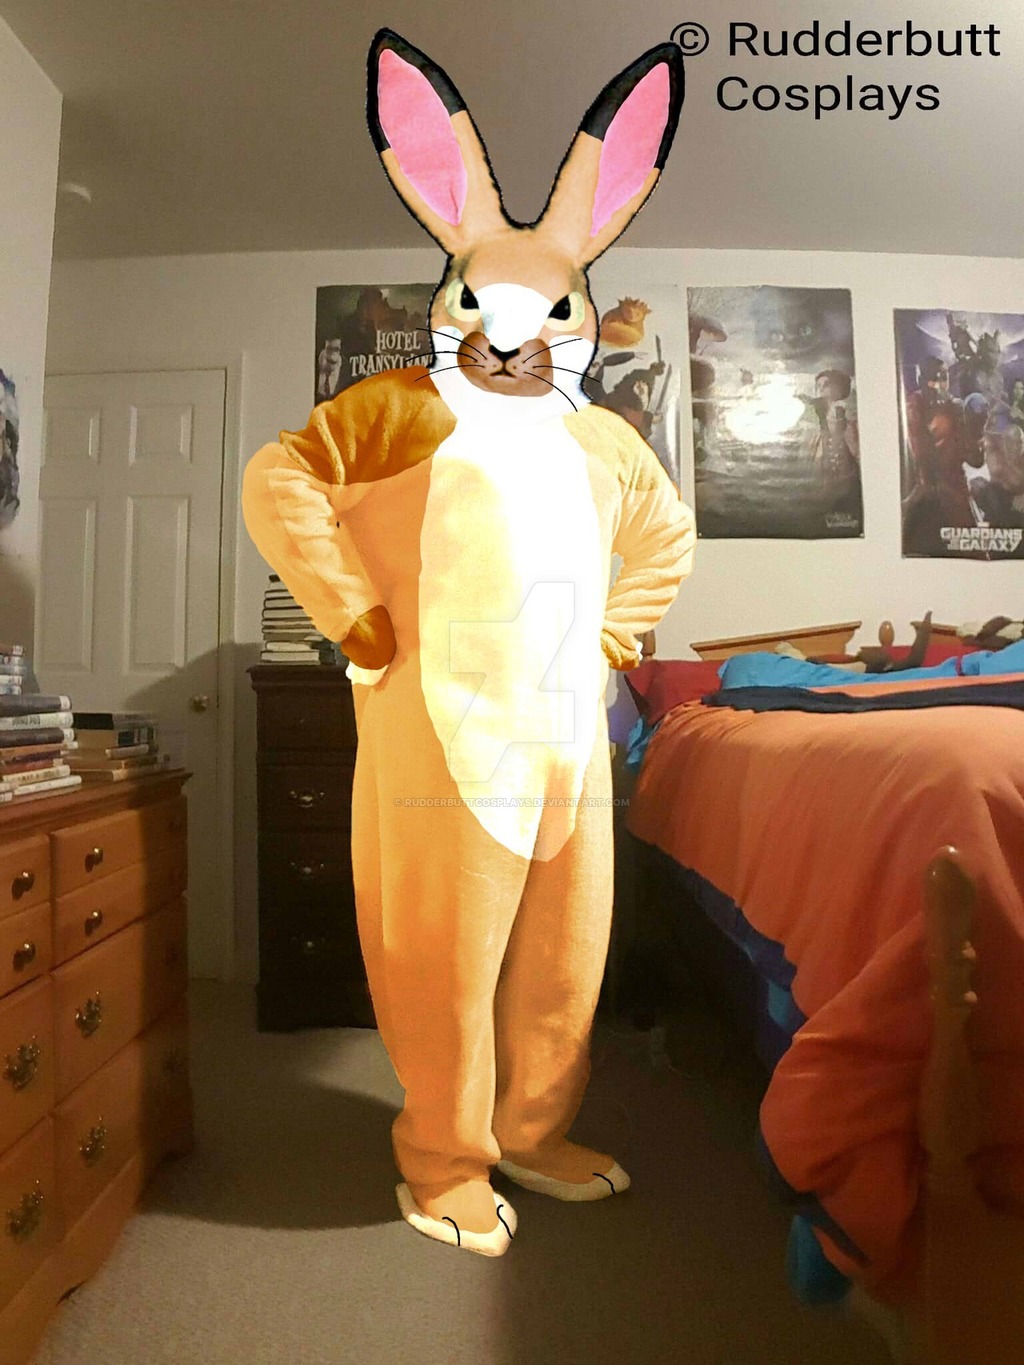 Most recent image: My new suit!